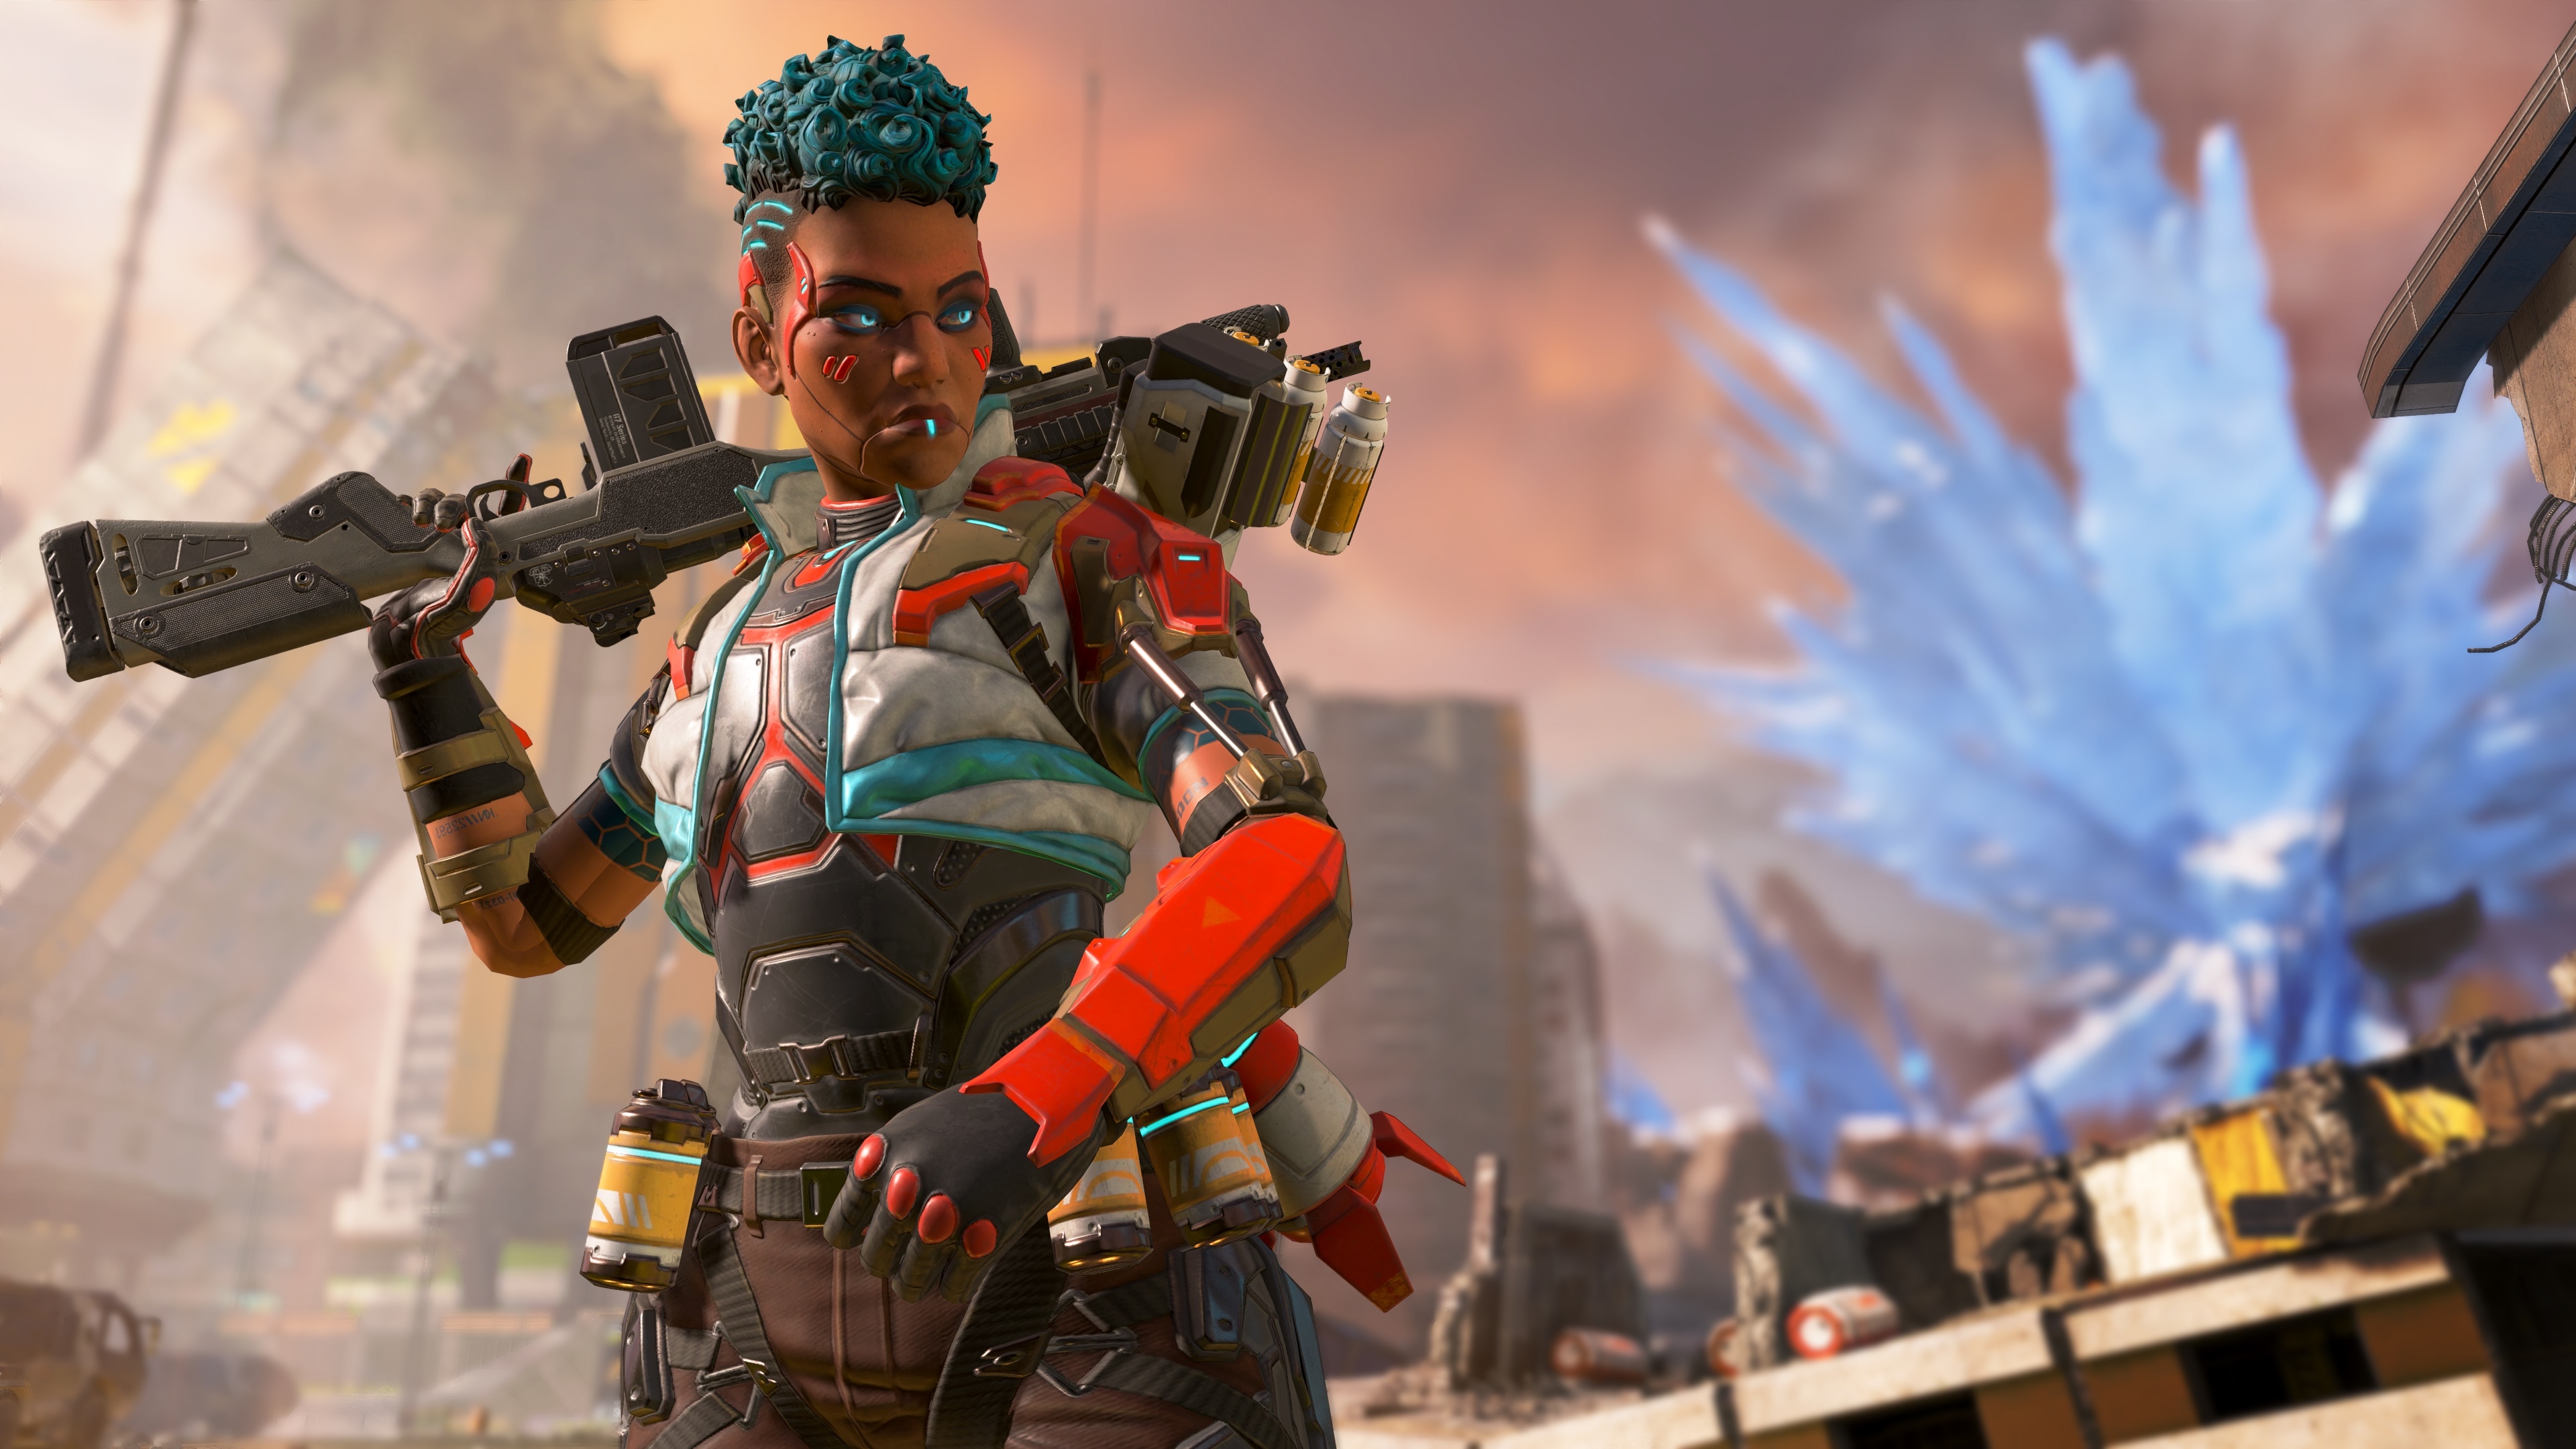 20 Bangalore Apex Legends HD Wallpapers and Backgrounds